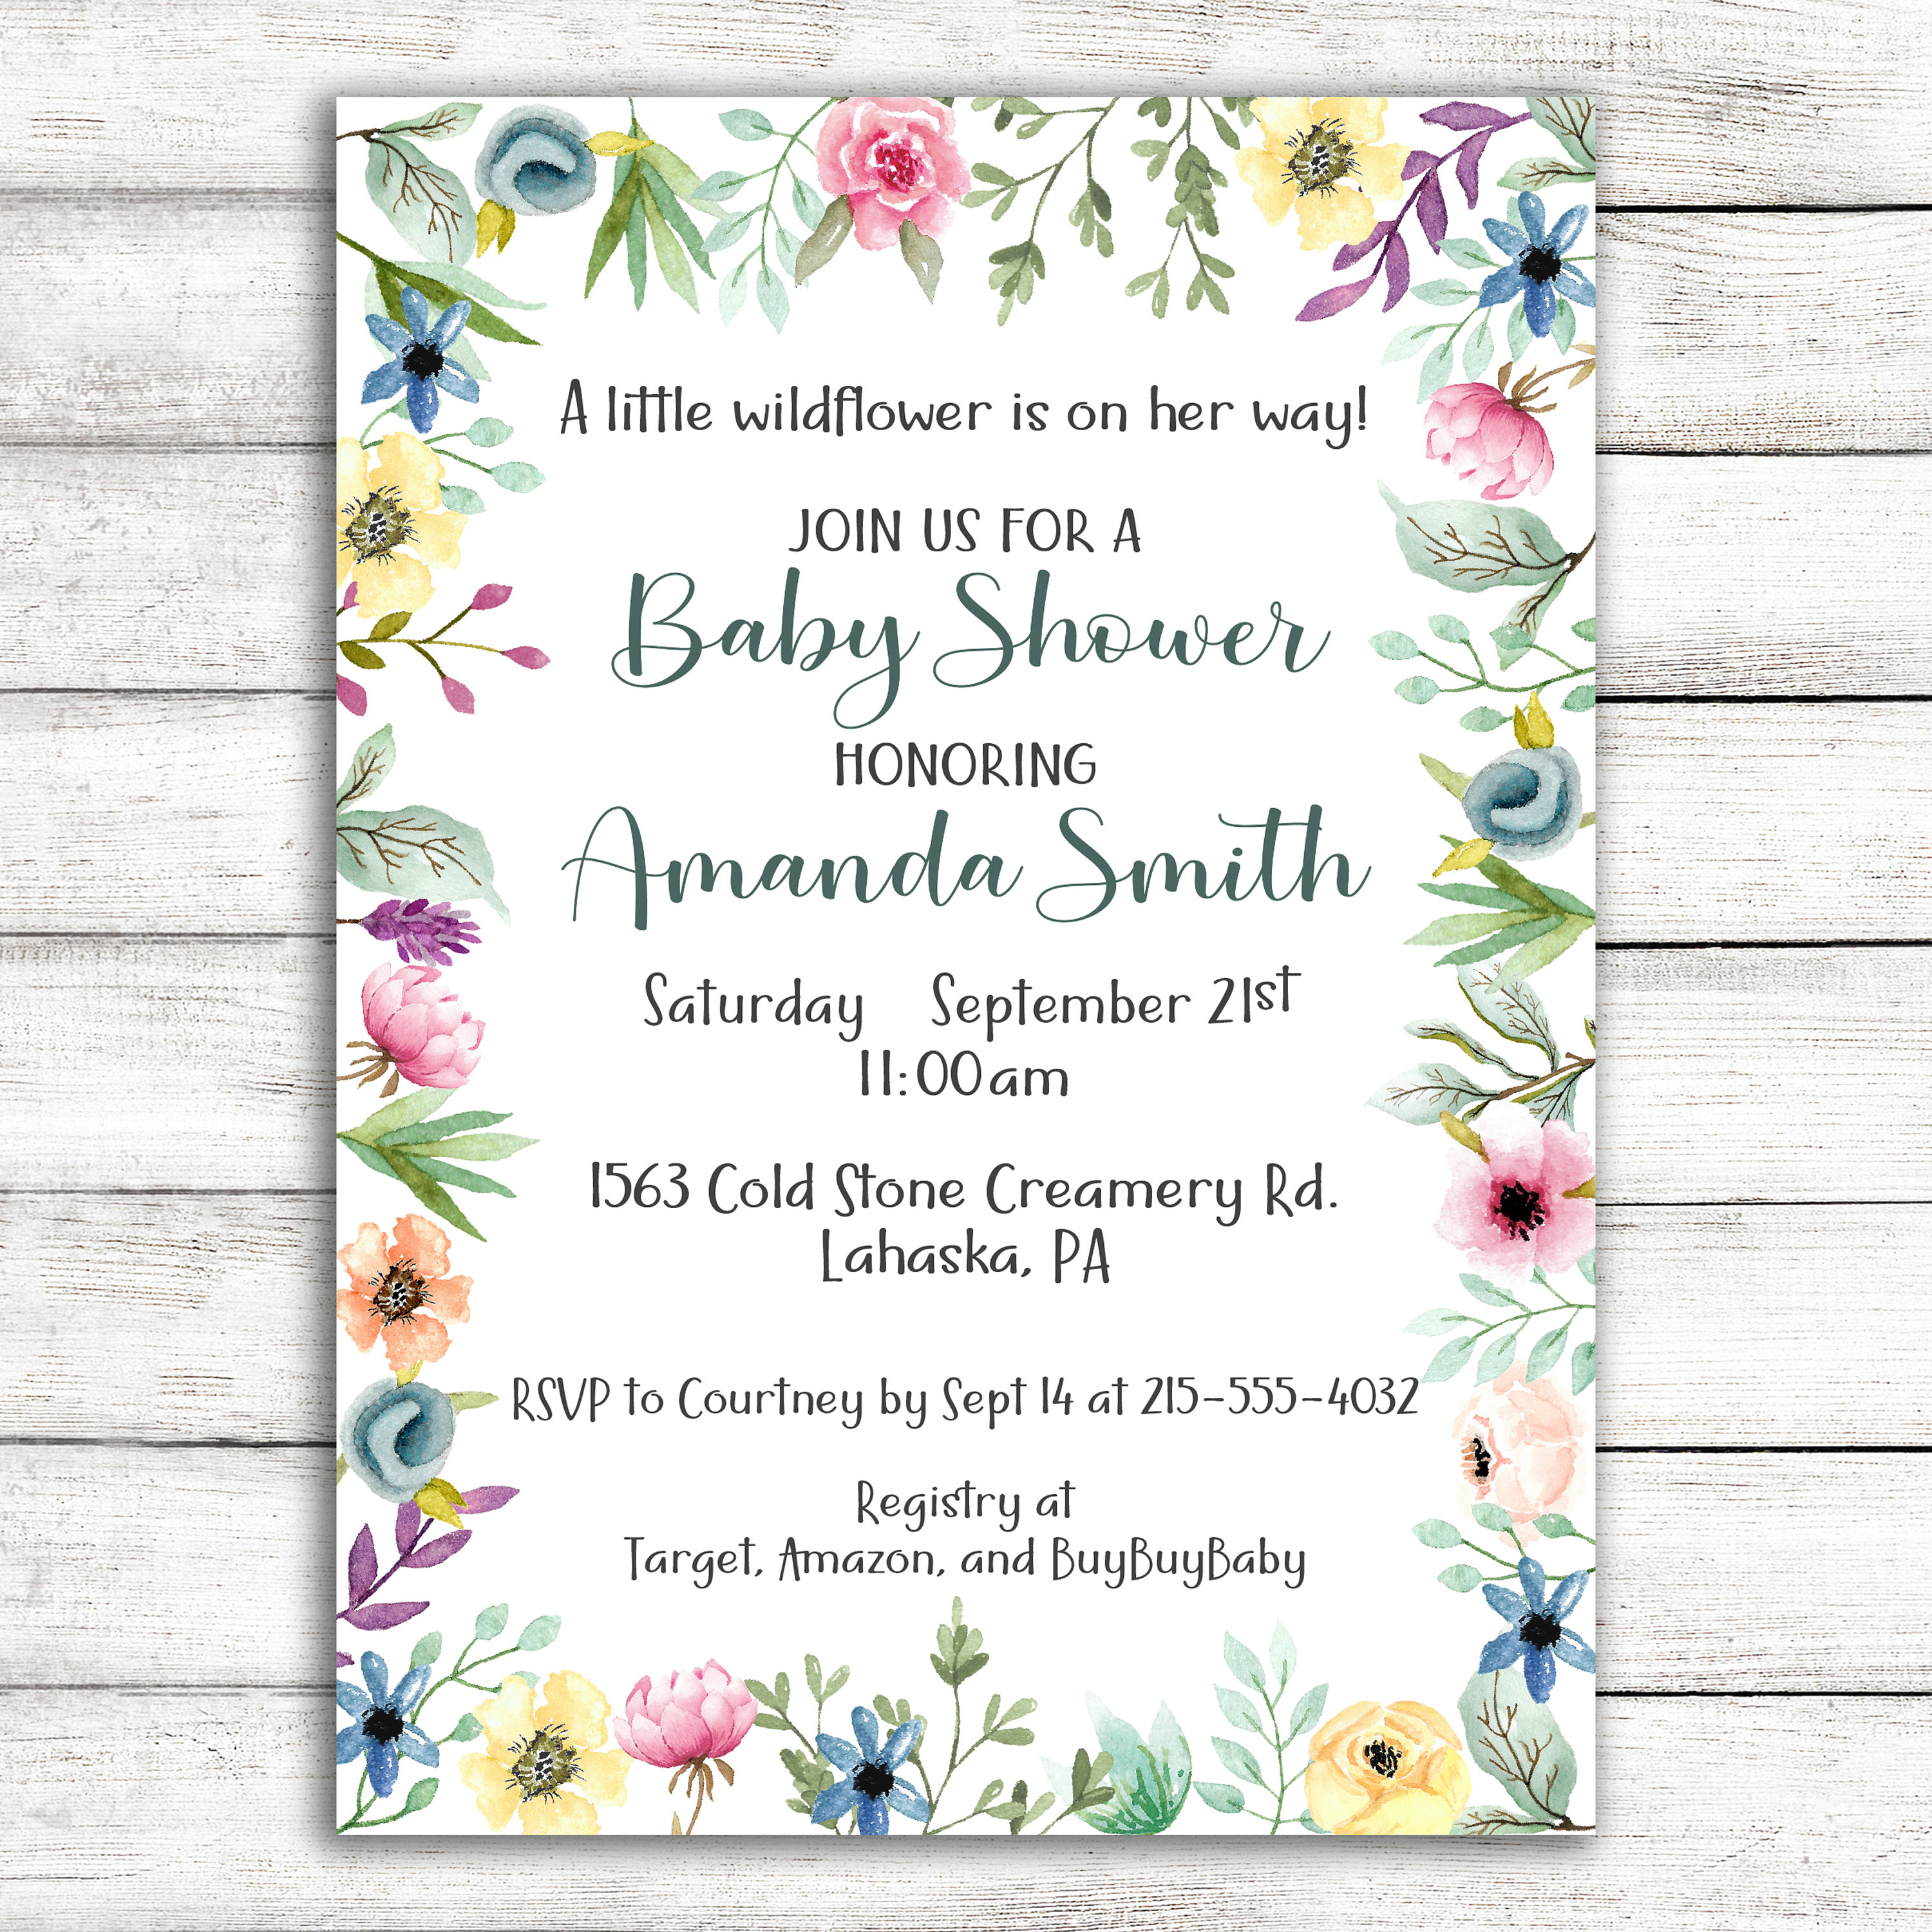 Printable Baby Shower Invitations with Wildflower Garland